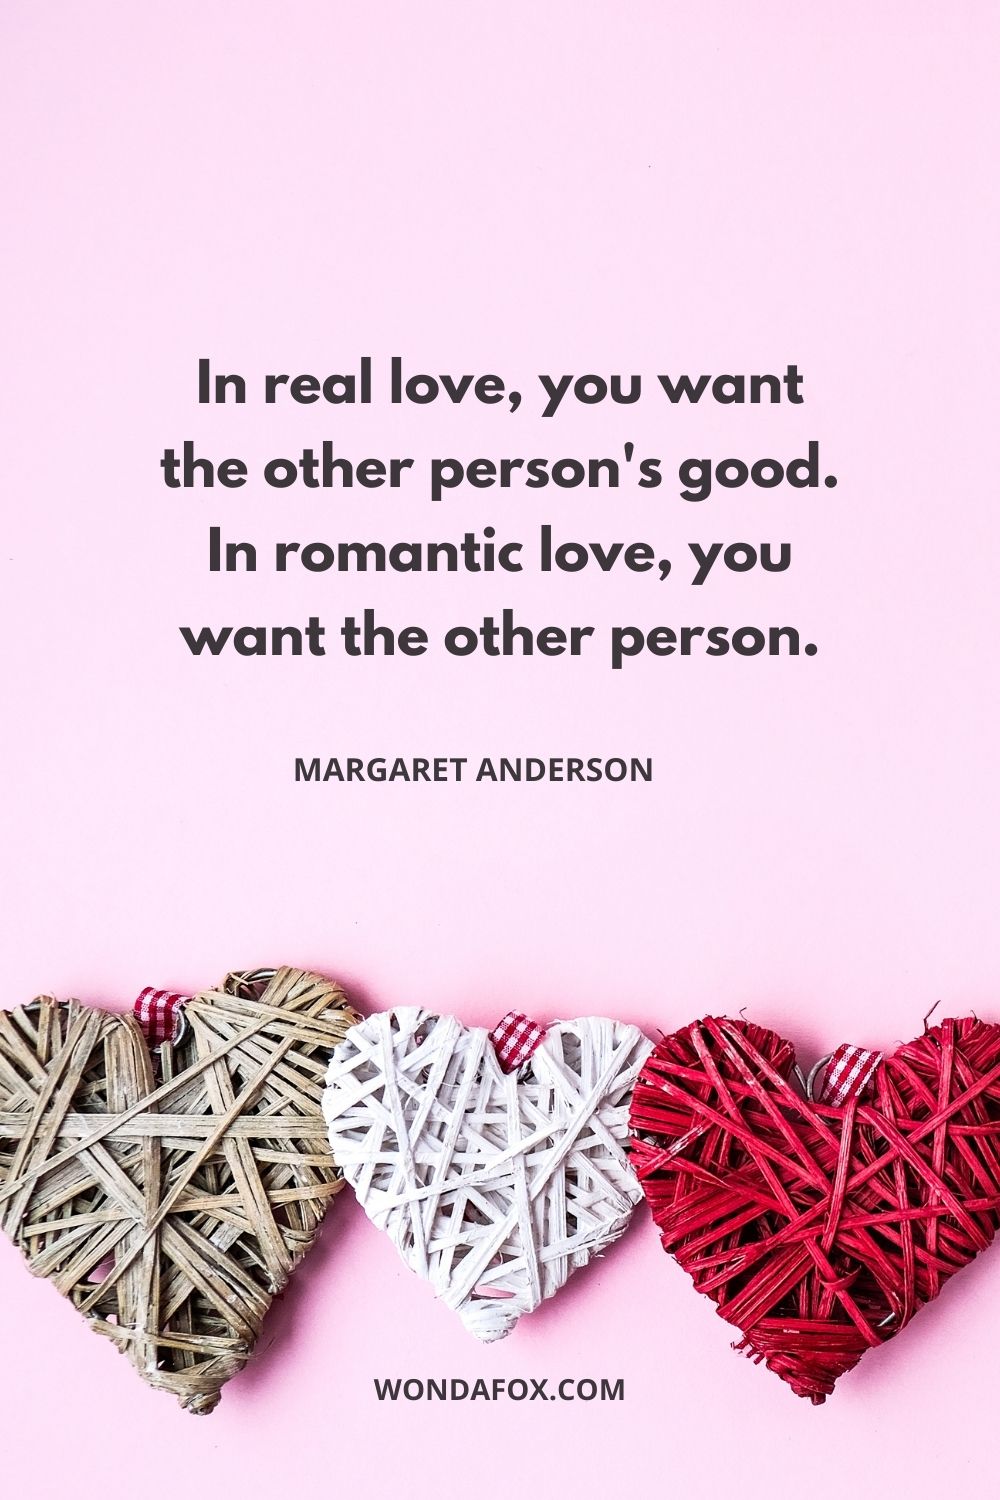 In real love, you want the other person's good. In romantic love, you want the other person.